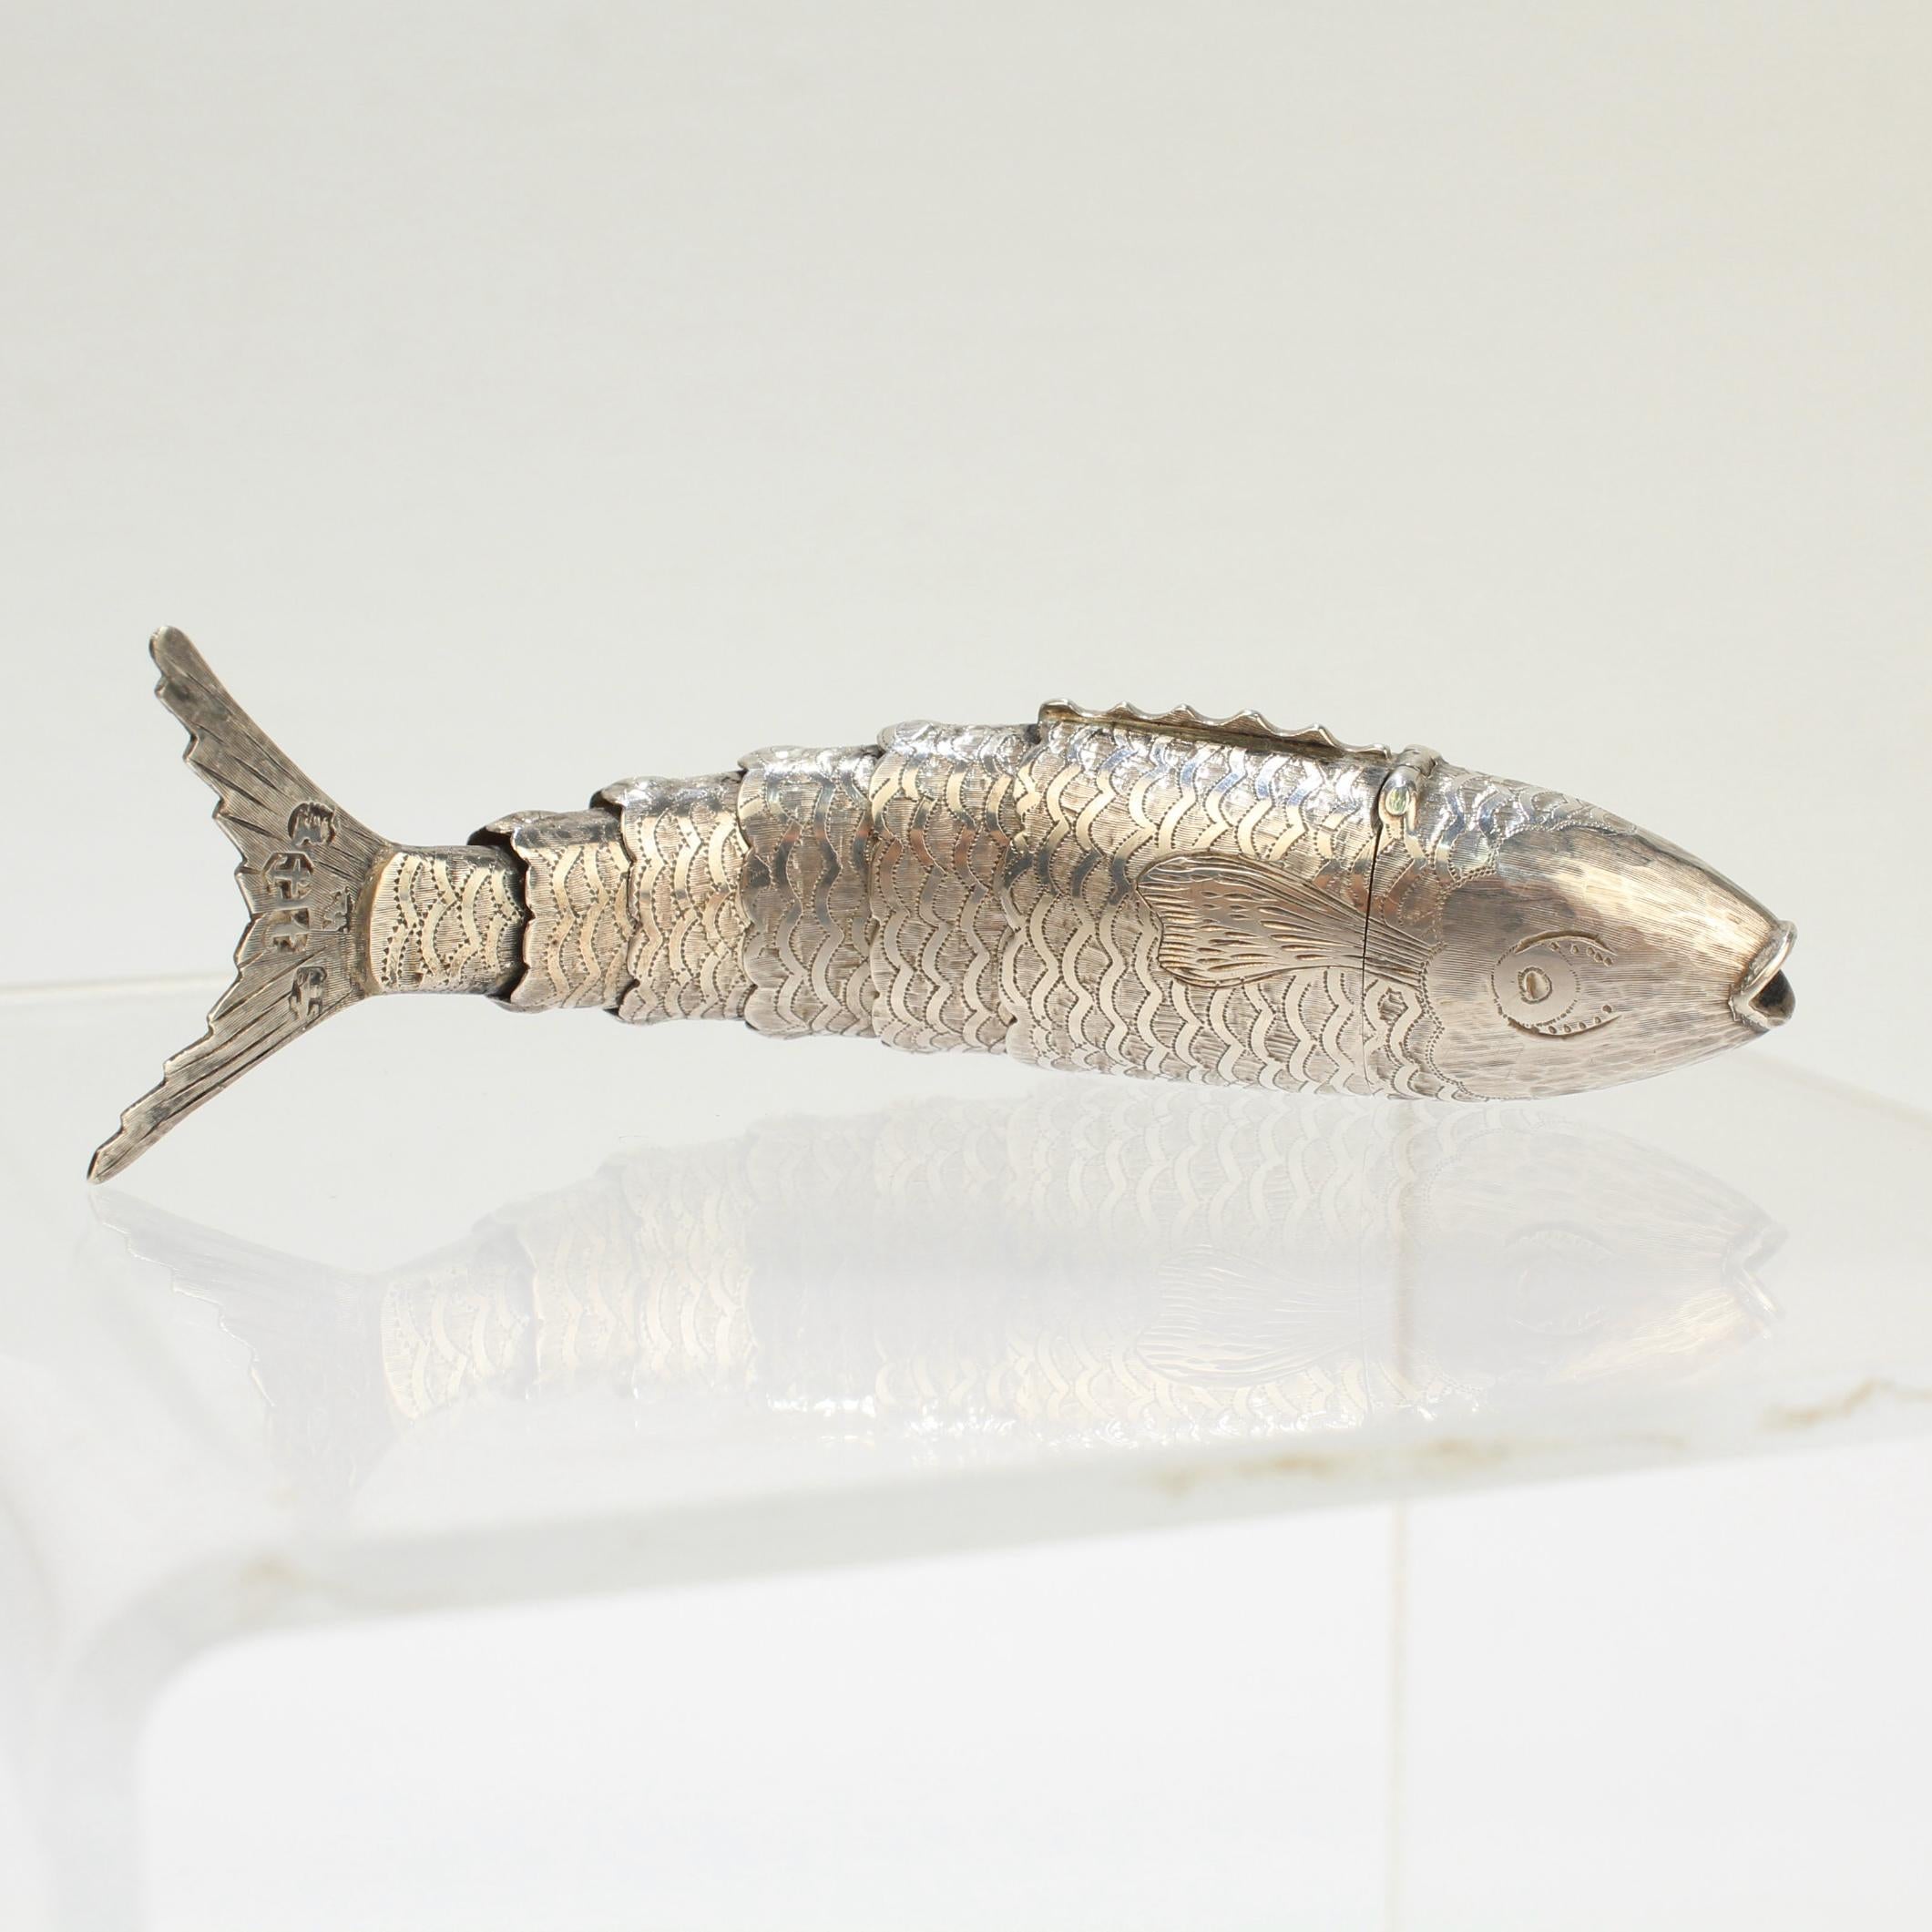  A very fine antique English sterling silver vinaigrette.

In the form of a fish with realistically engraved eyes, fins and scales.

A hinged cover in the form of the fish's head opens to reveal a grille and sponge compartment. The body supports 5